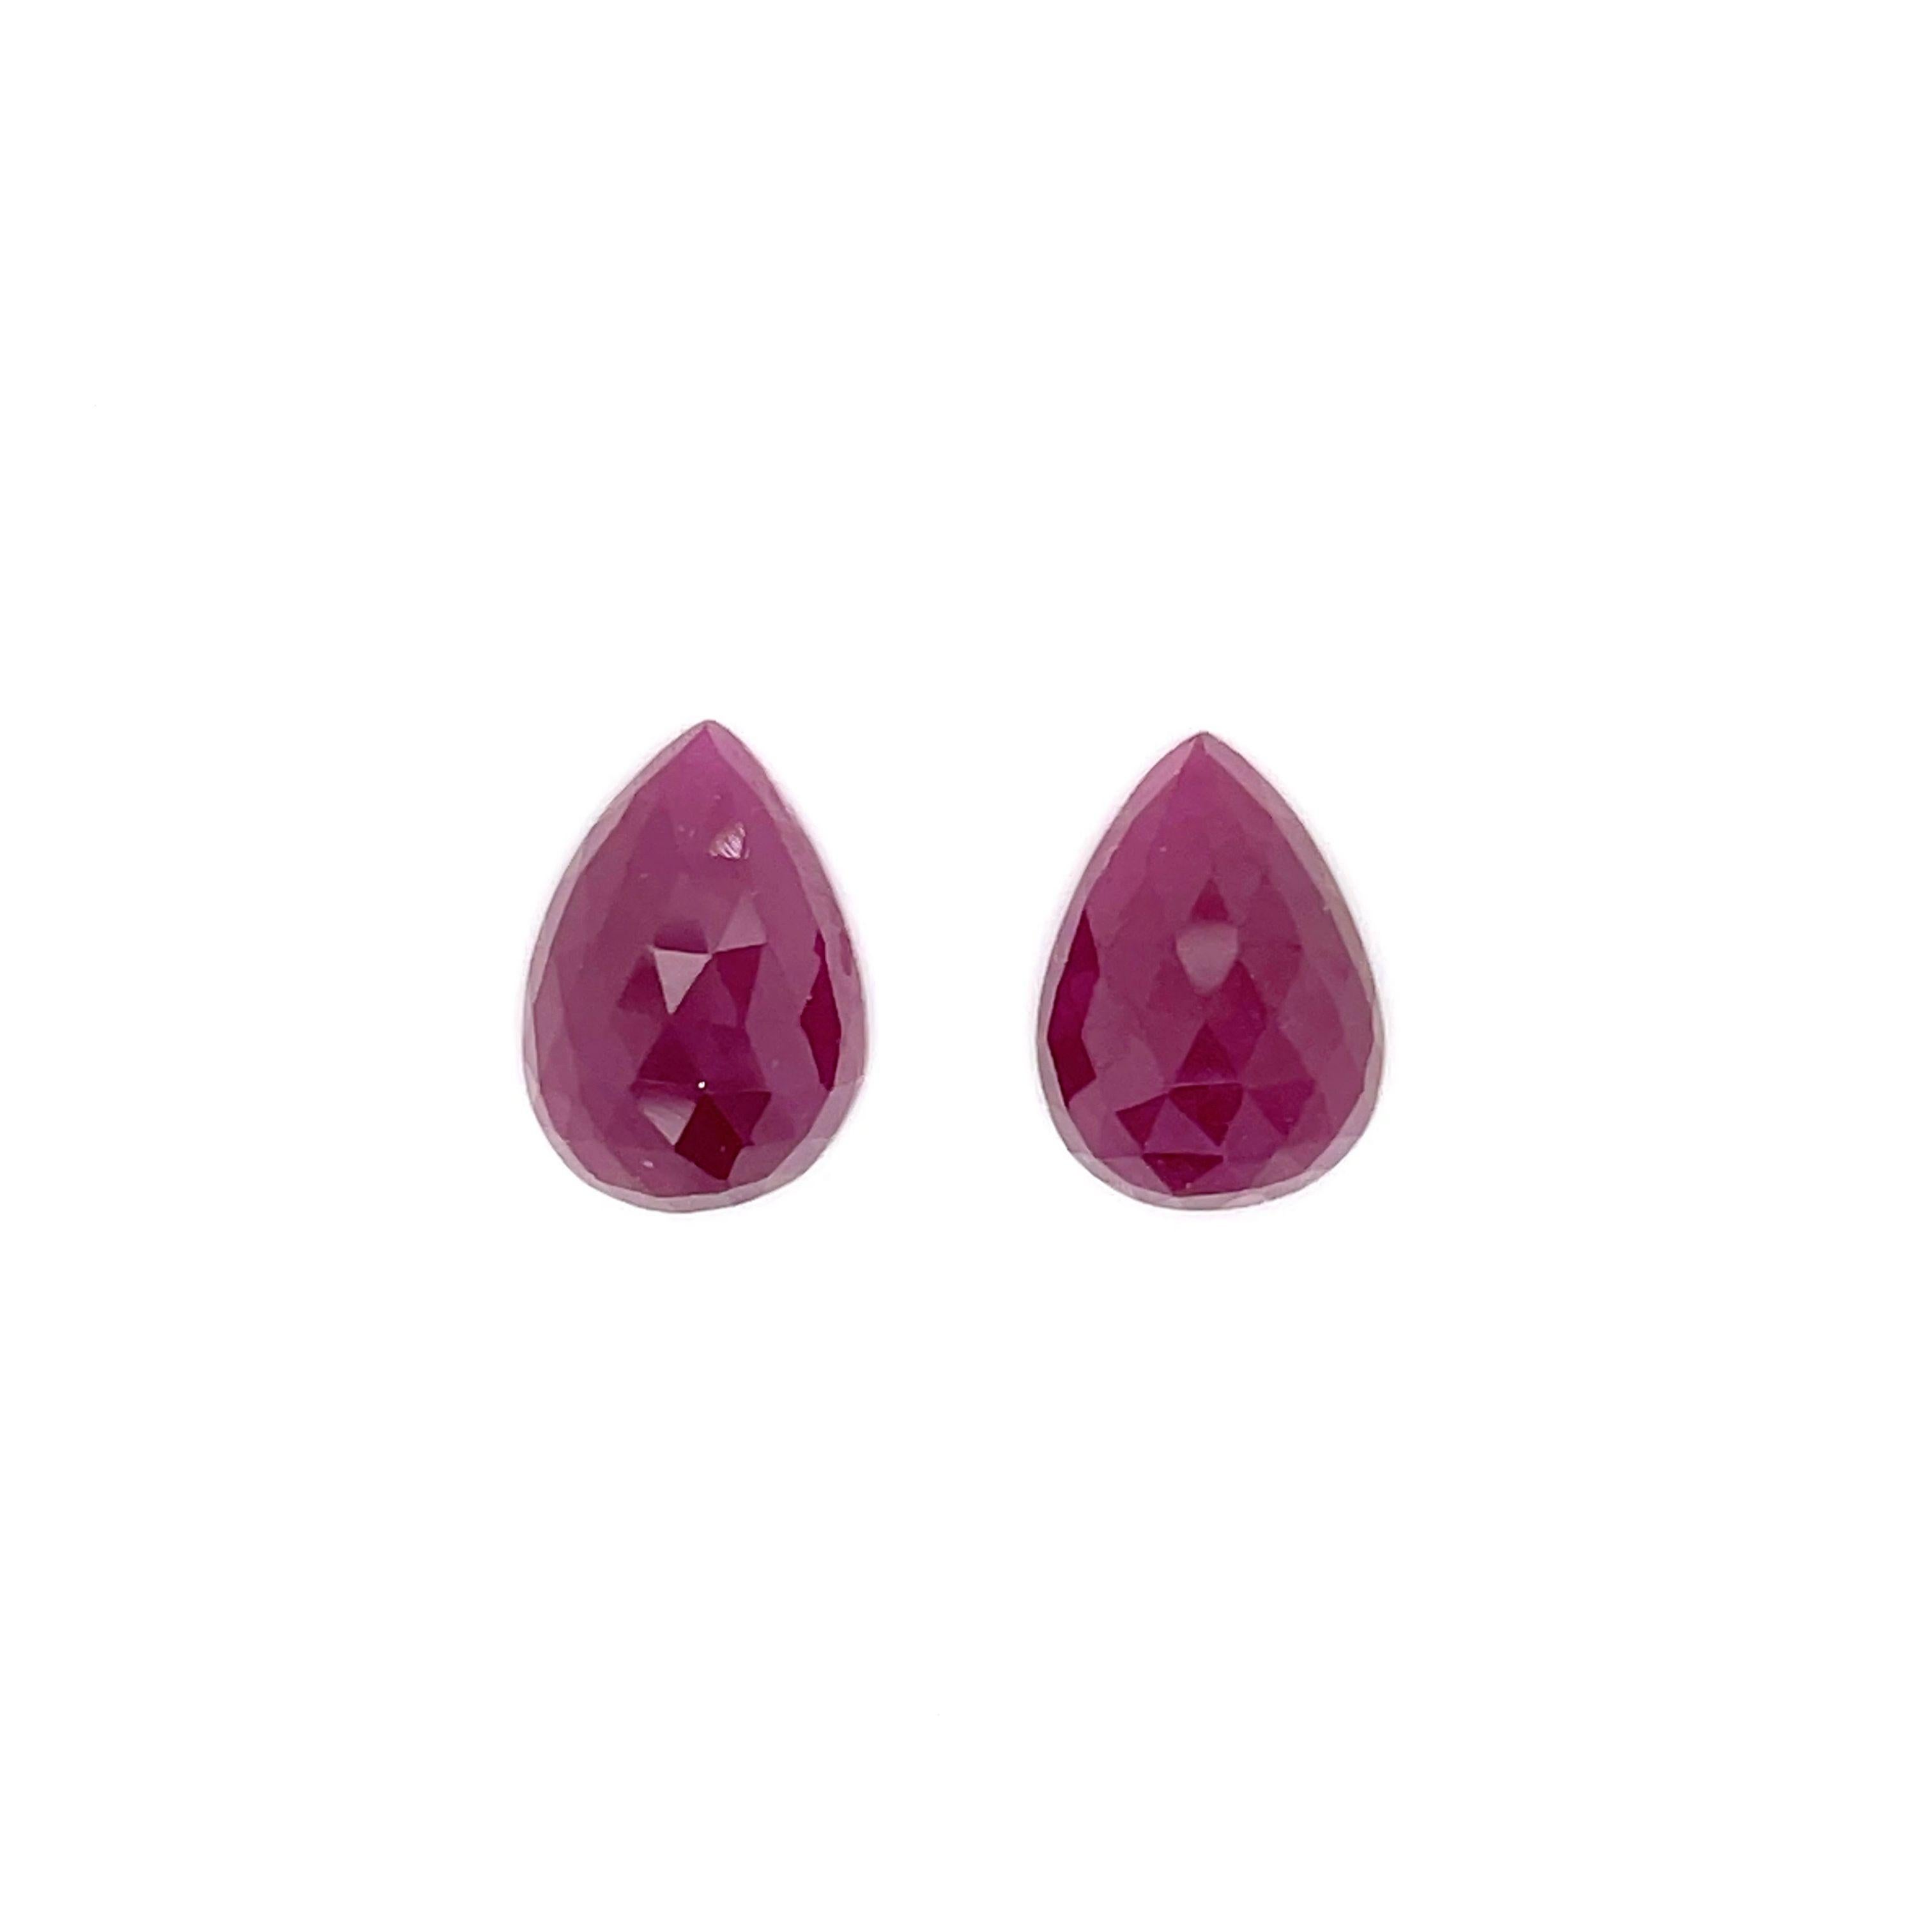 No Heat 2 Indian Pear-Shaped Buff Rubies Cts 20.22 In New Condition For Sale In Hong Kong, HK